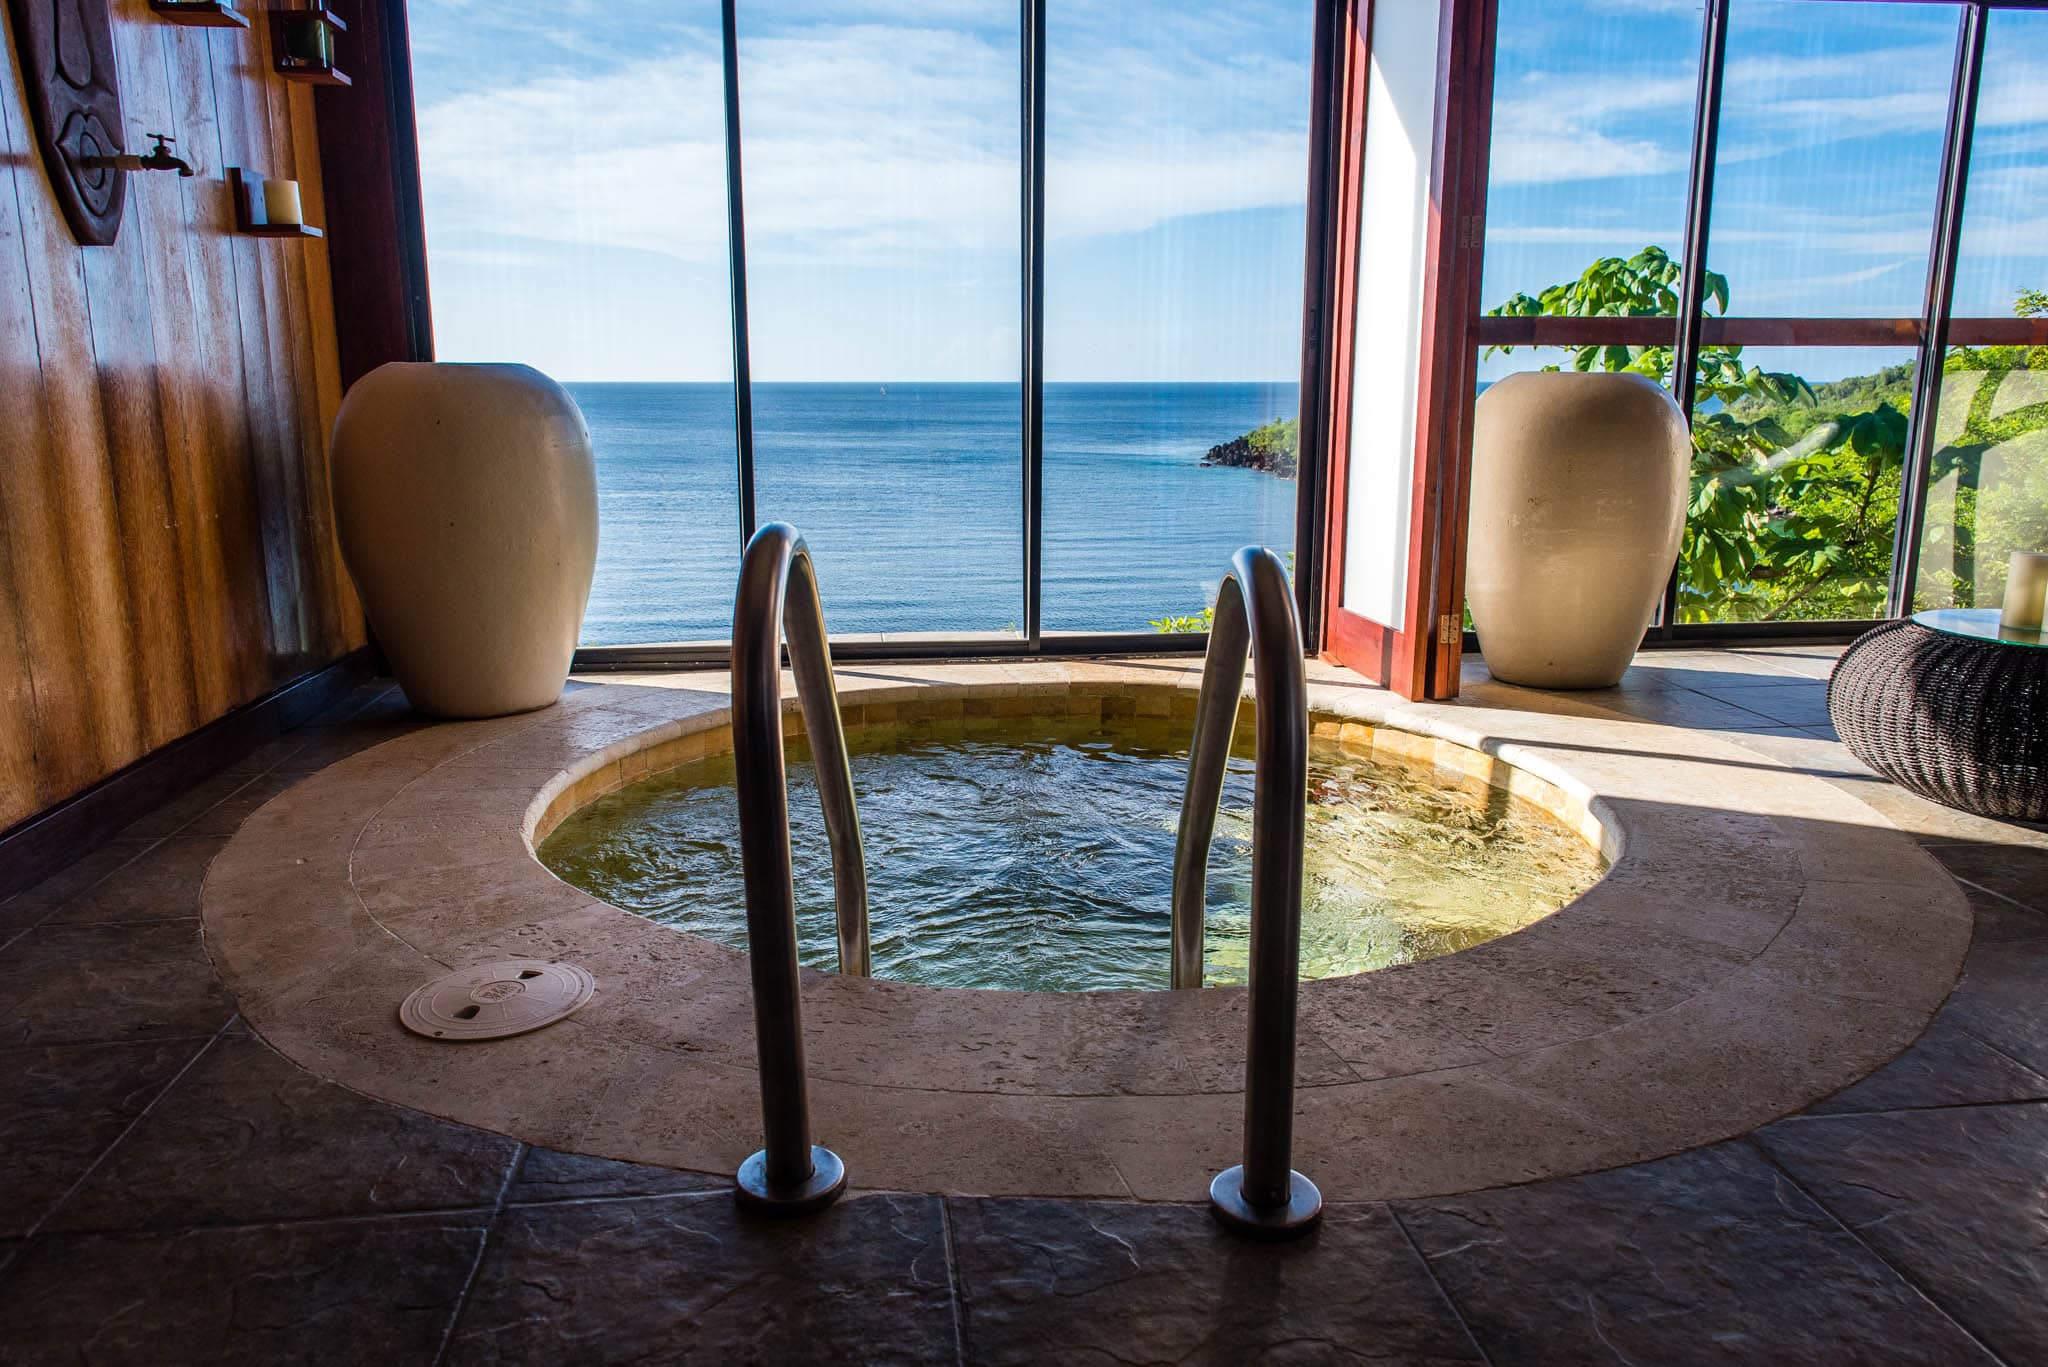 Don't forget to visit the absolutely stunning spa with floor to ceiling windows.